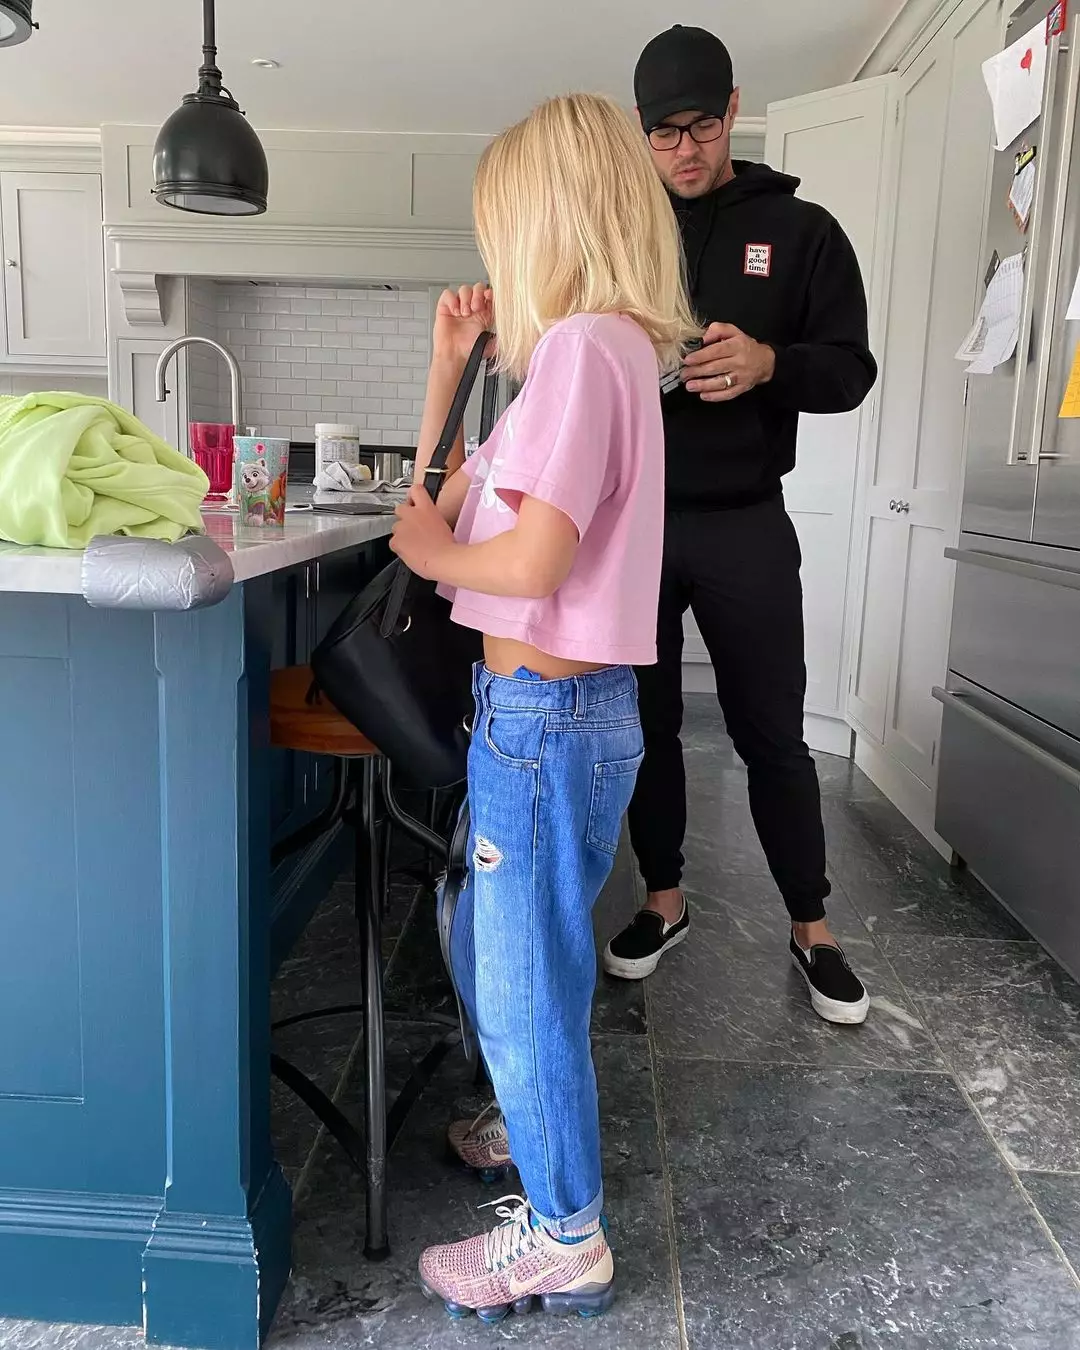 The snap shows Ace wearing a pink tee, blue jeans and pastel Nike trainers, with shoulder length hair (